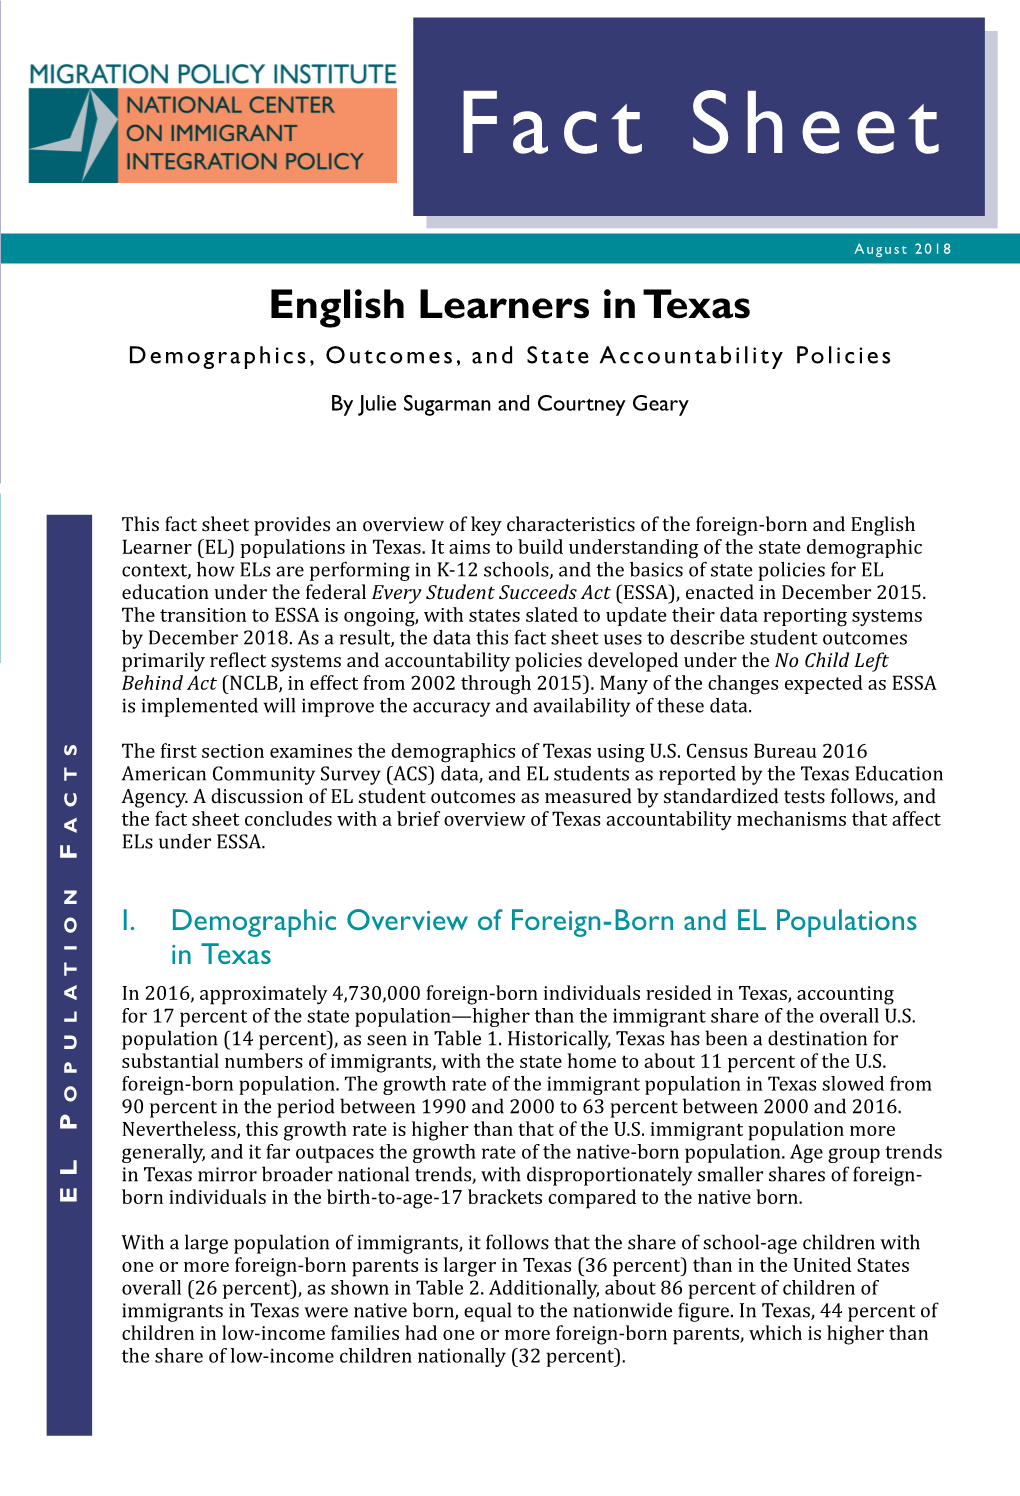 English Learners in Texas Demographics, Outcomes, and State Accountability Policies